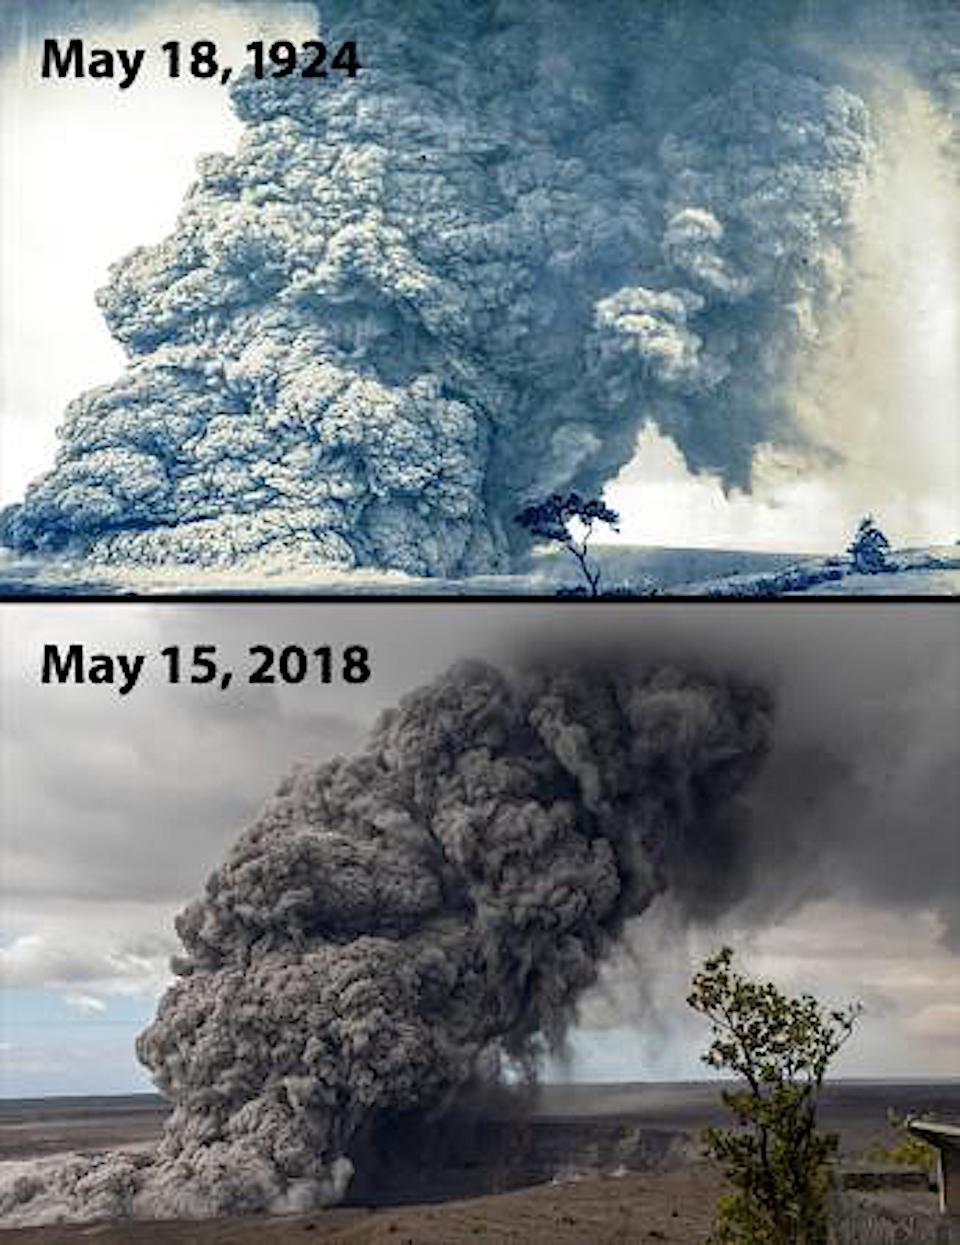 Explosive eruption columns of ash rising from Halema‘uma‘u at 11:15 a.m. on May 18, 1924 (top) and at 11:05 a.m. on May 15, 2018 (bottom) look similar. Researchers are re-evaluating early assumptions about the role groundwater played in triggering these e